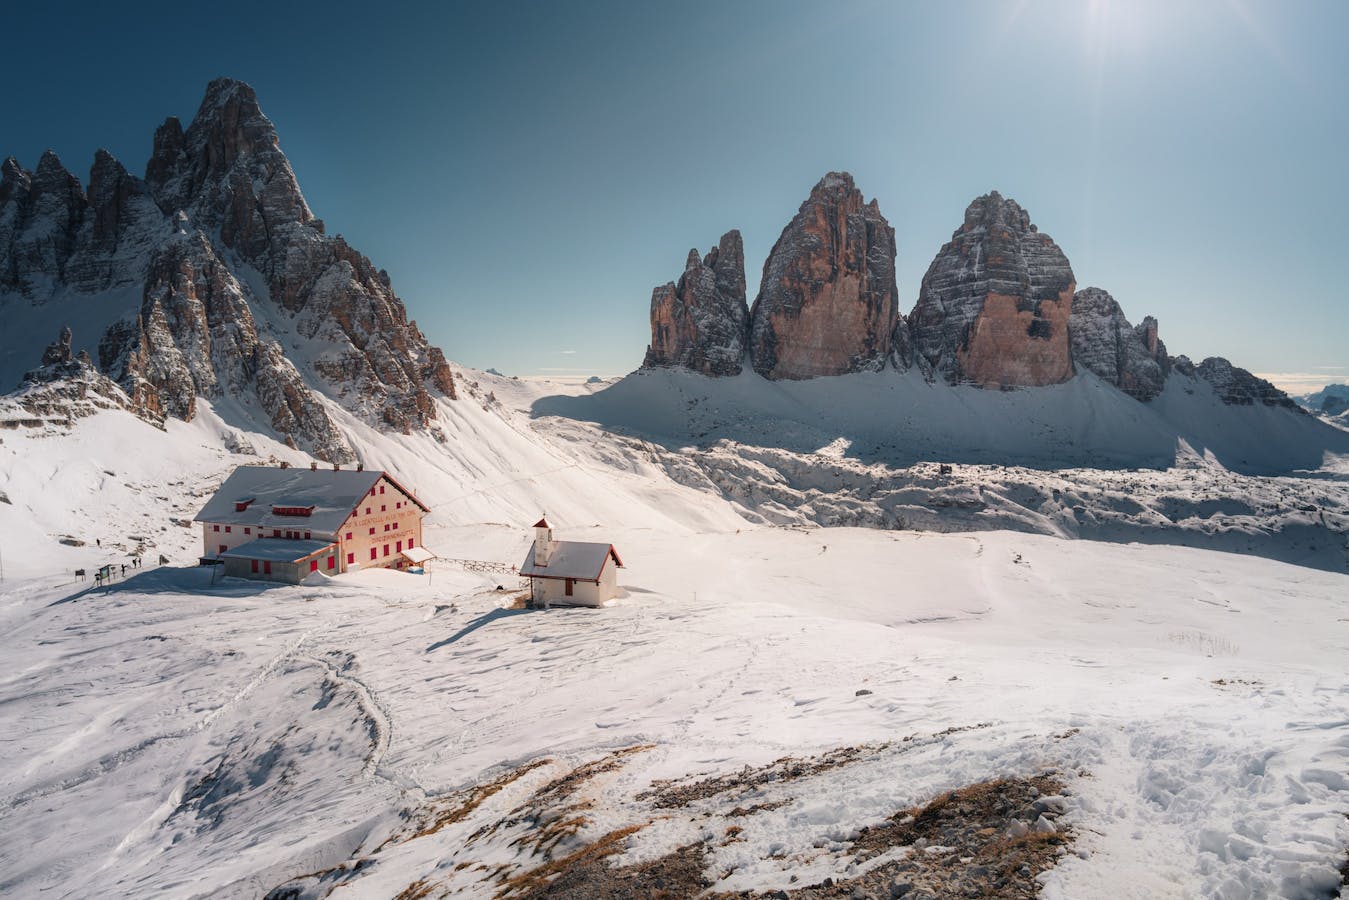 The Dolomites in winter, Italy